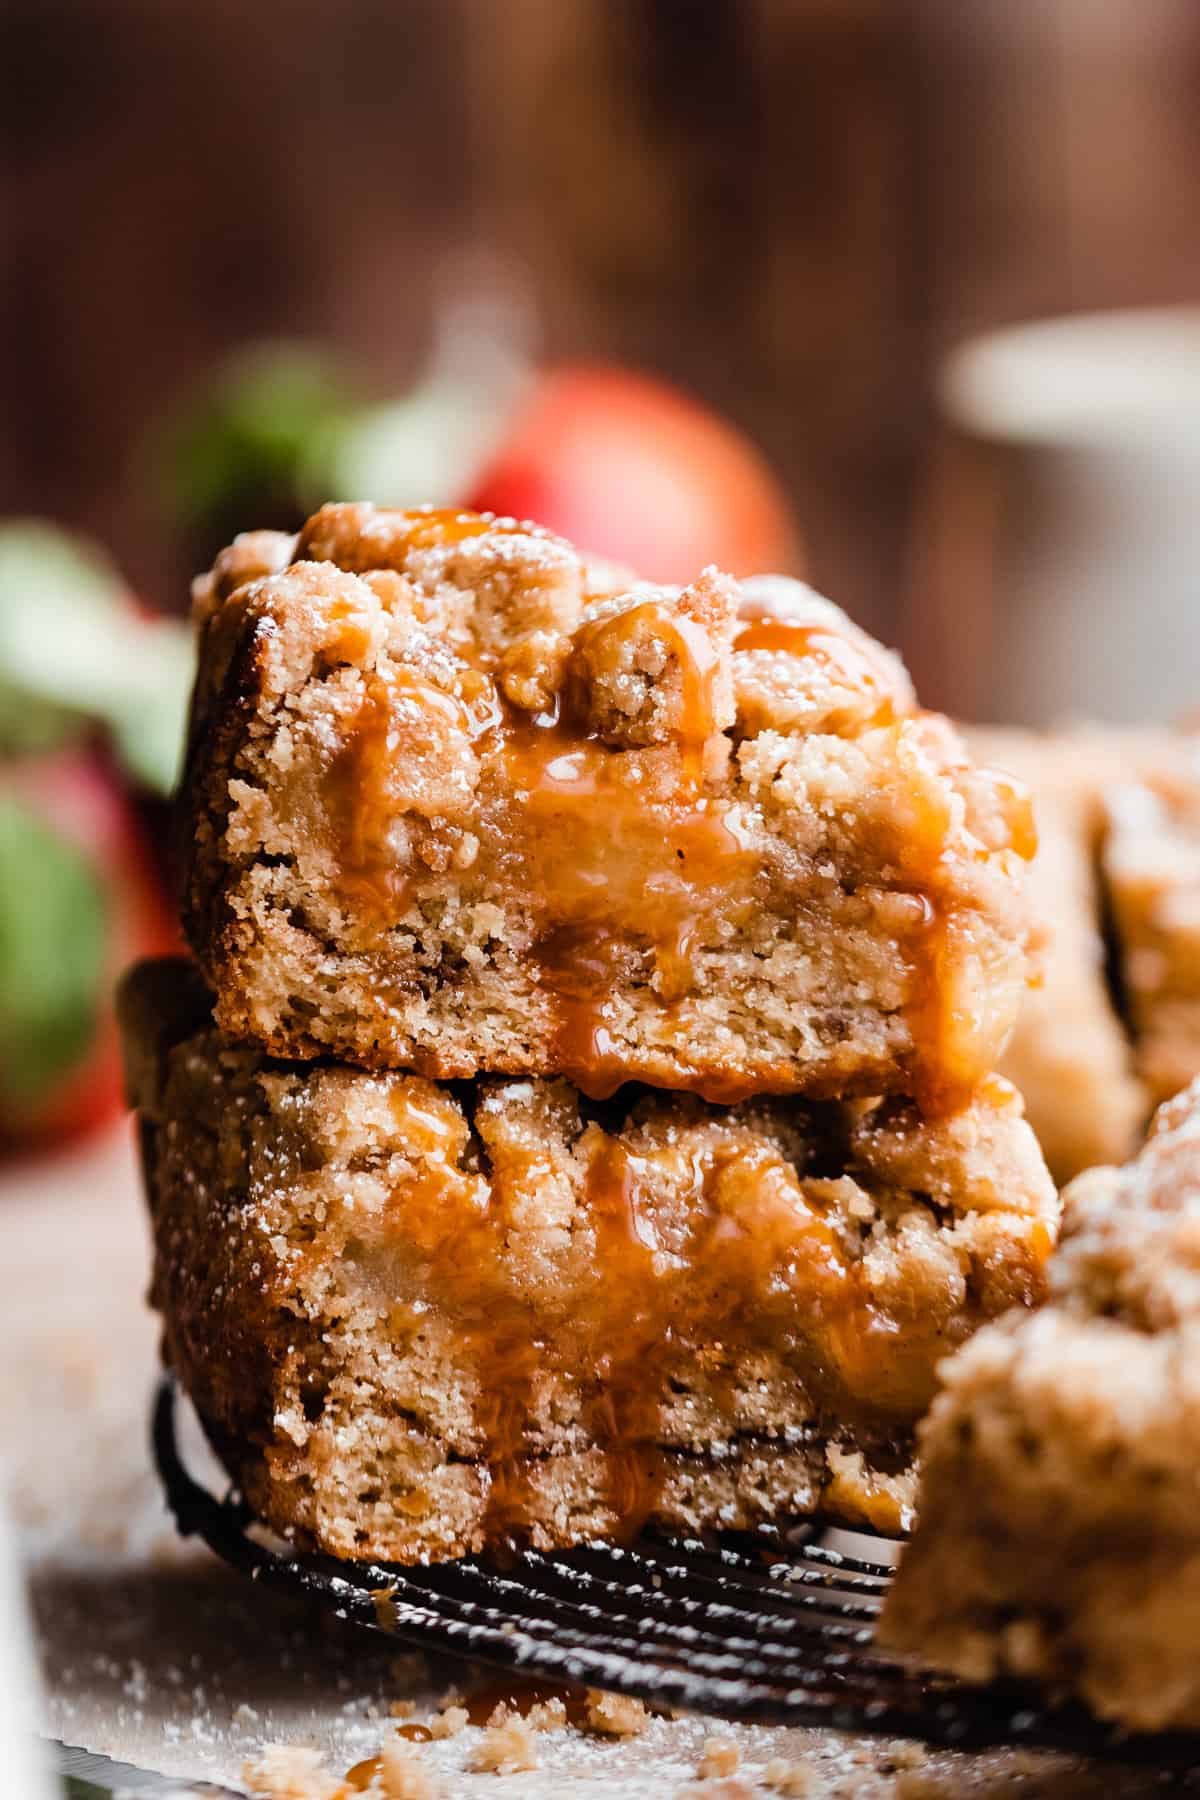 A stack of two slices of apple crumb cake drizzled with caramel, on a wire rack.